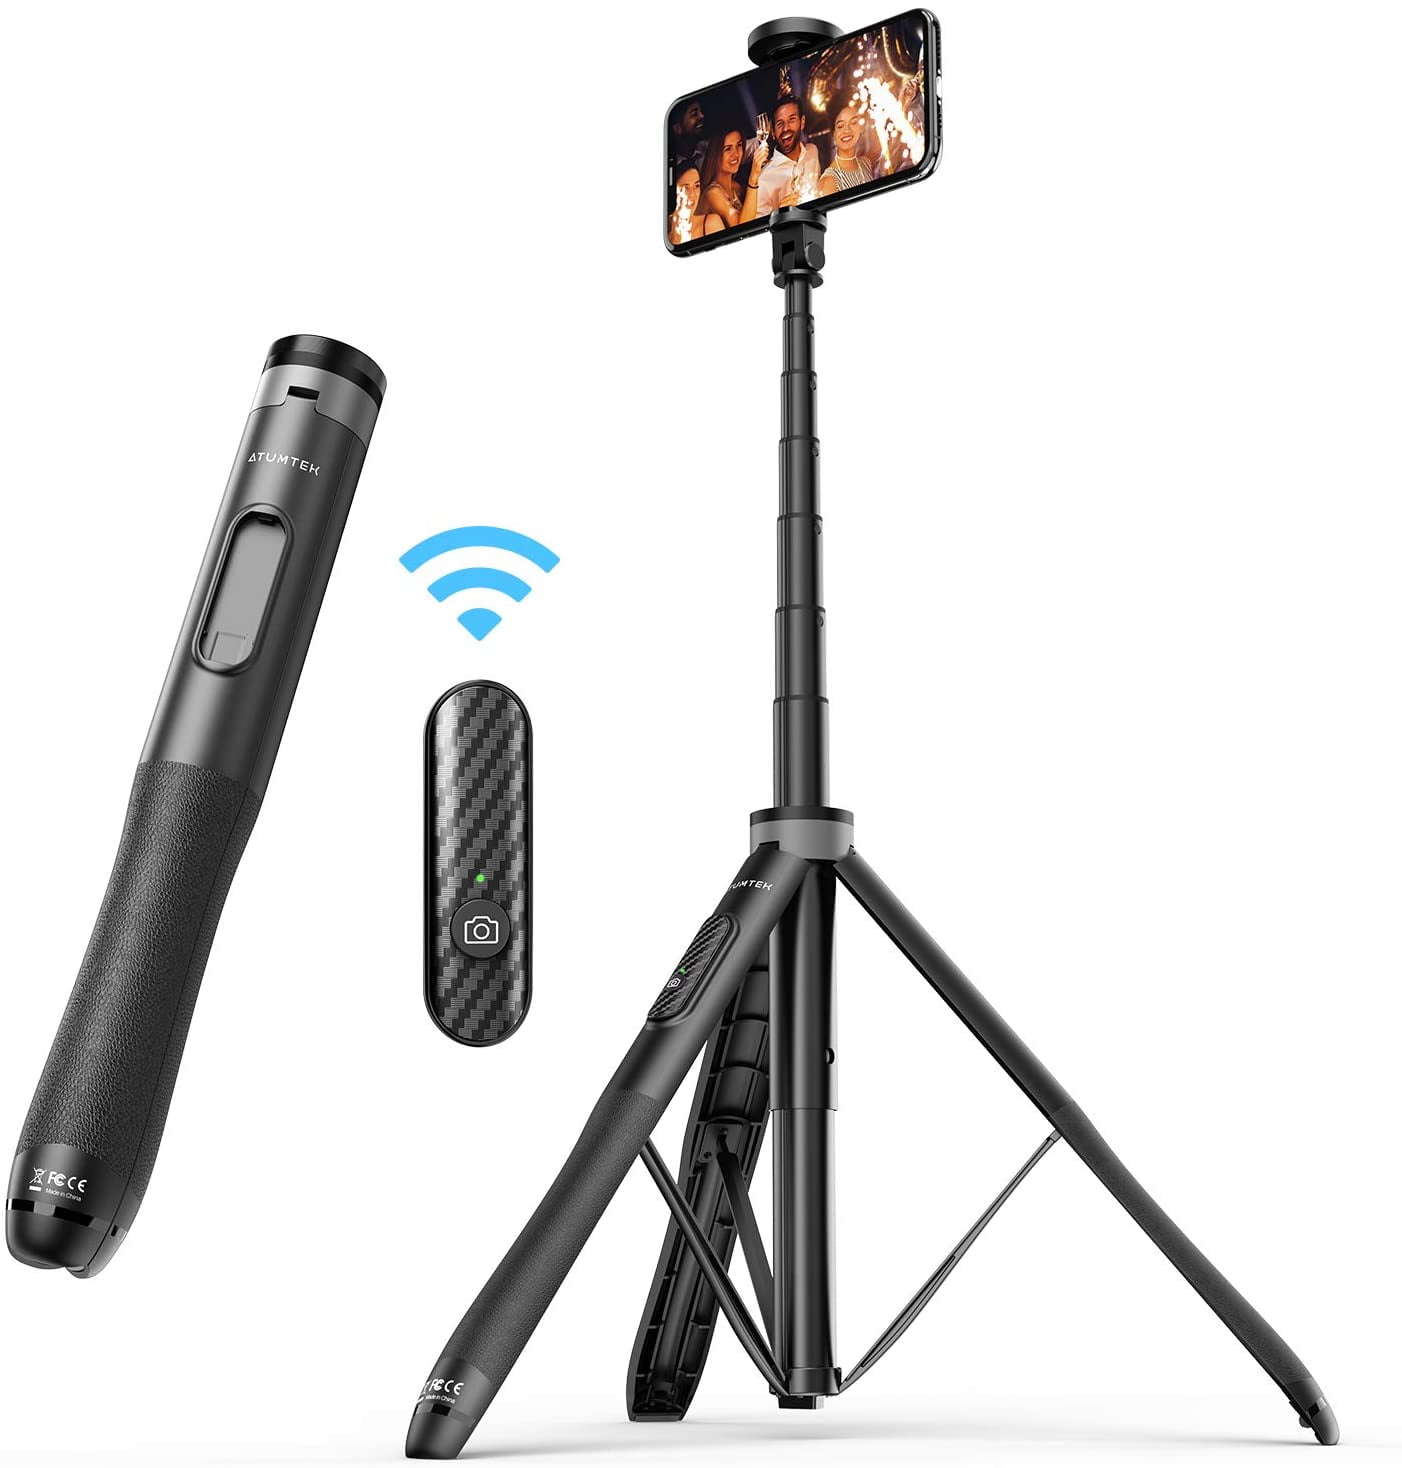 Professional Video Tripod Durable Extendable Bluetooth Tripod Selfie Stick with Fill Light Not Hurt Eye for Phone Sport Camera Selfie Stick Tripod for DSLR Shooting Video Camcorder 